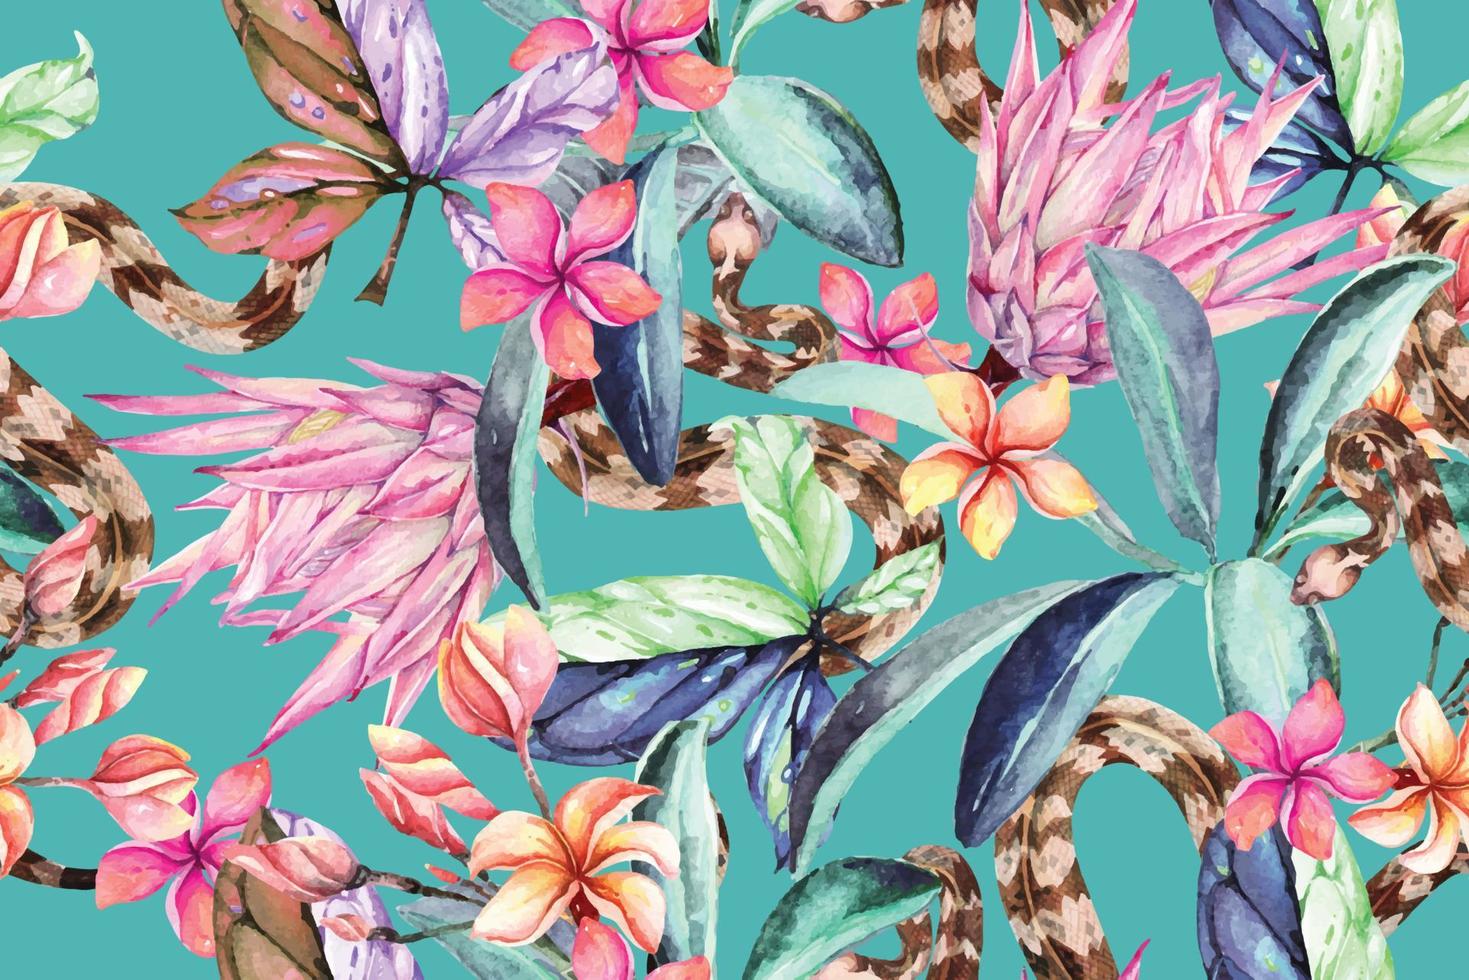 Seamless pattern of plumeria,botanical and snake painted in watercolor.Designed for fabric luxurious and wallpaper, vintage style.Botanical aloha background.Blooming flowers for summer. vector